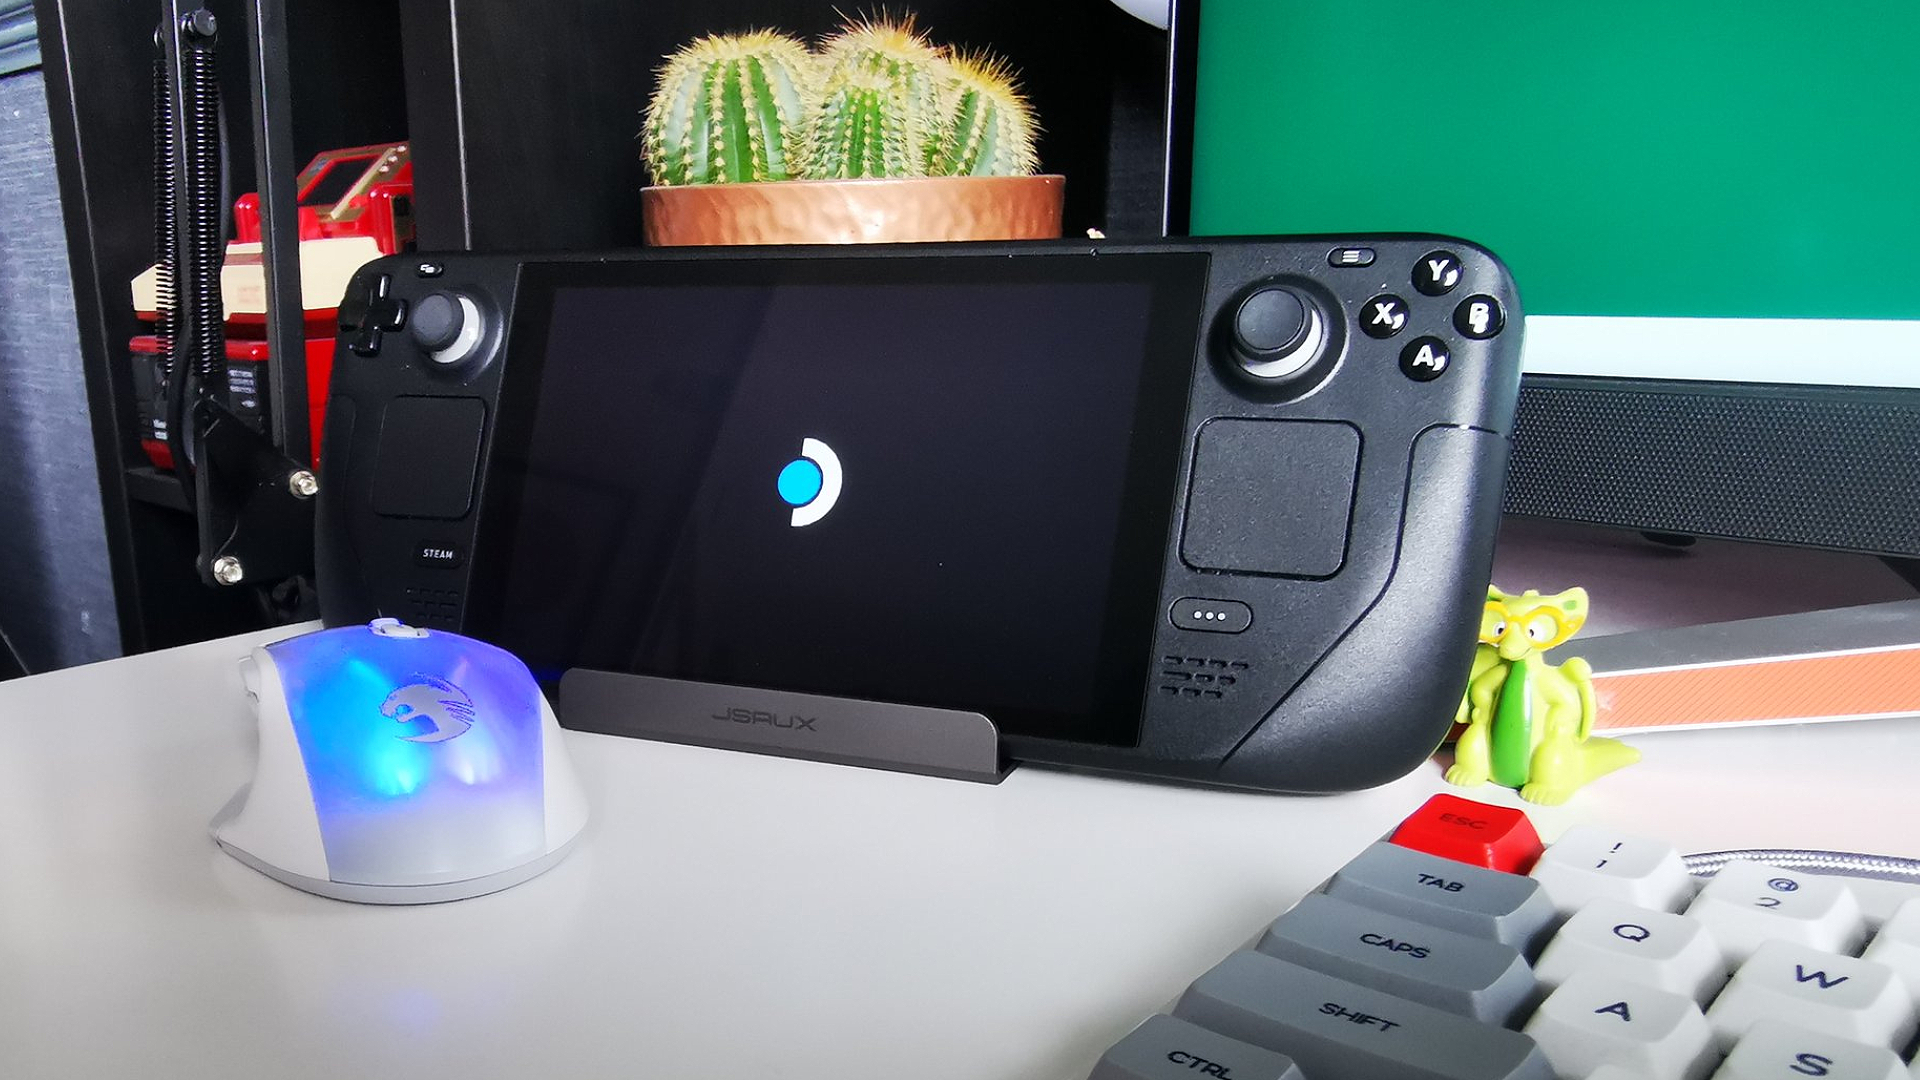 Roccat Kone XP Air gaming mouse next to Steam Deck and dock